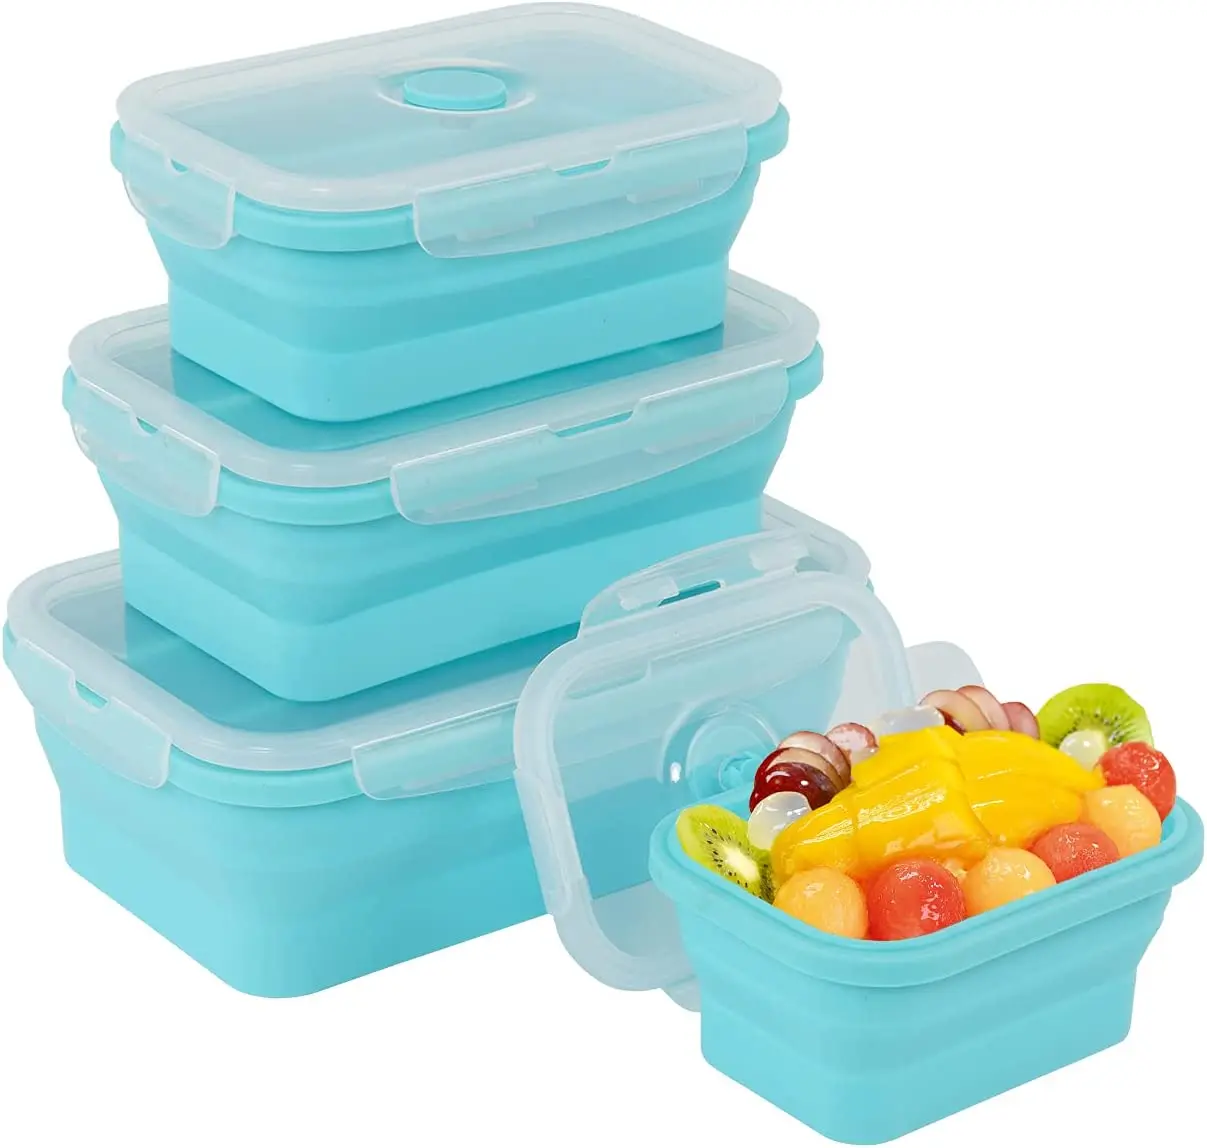 https://ae01.alicdn.com/kf/Sdb9747318a784052af9ad034df5f04901/4-Pcs-Silicone-Collapsible-Food-Storage-Containers-With-Lids-Silicone-Lunch-Box-Bento-Box-BPA-Free.jpg